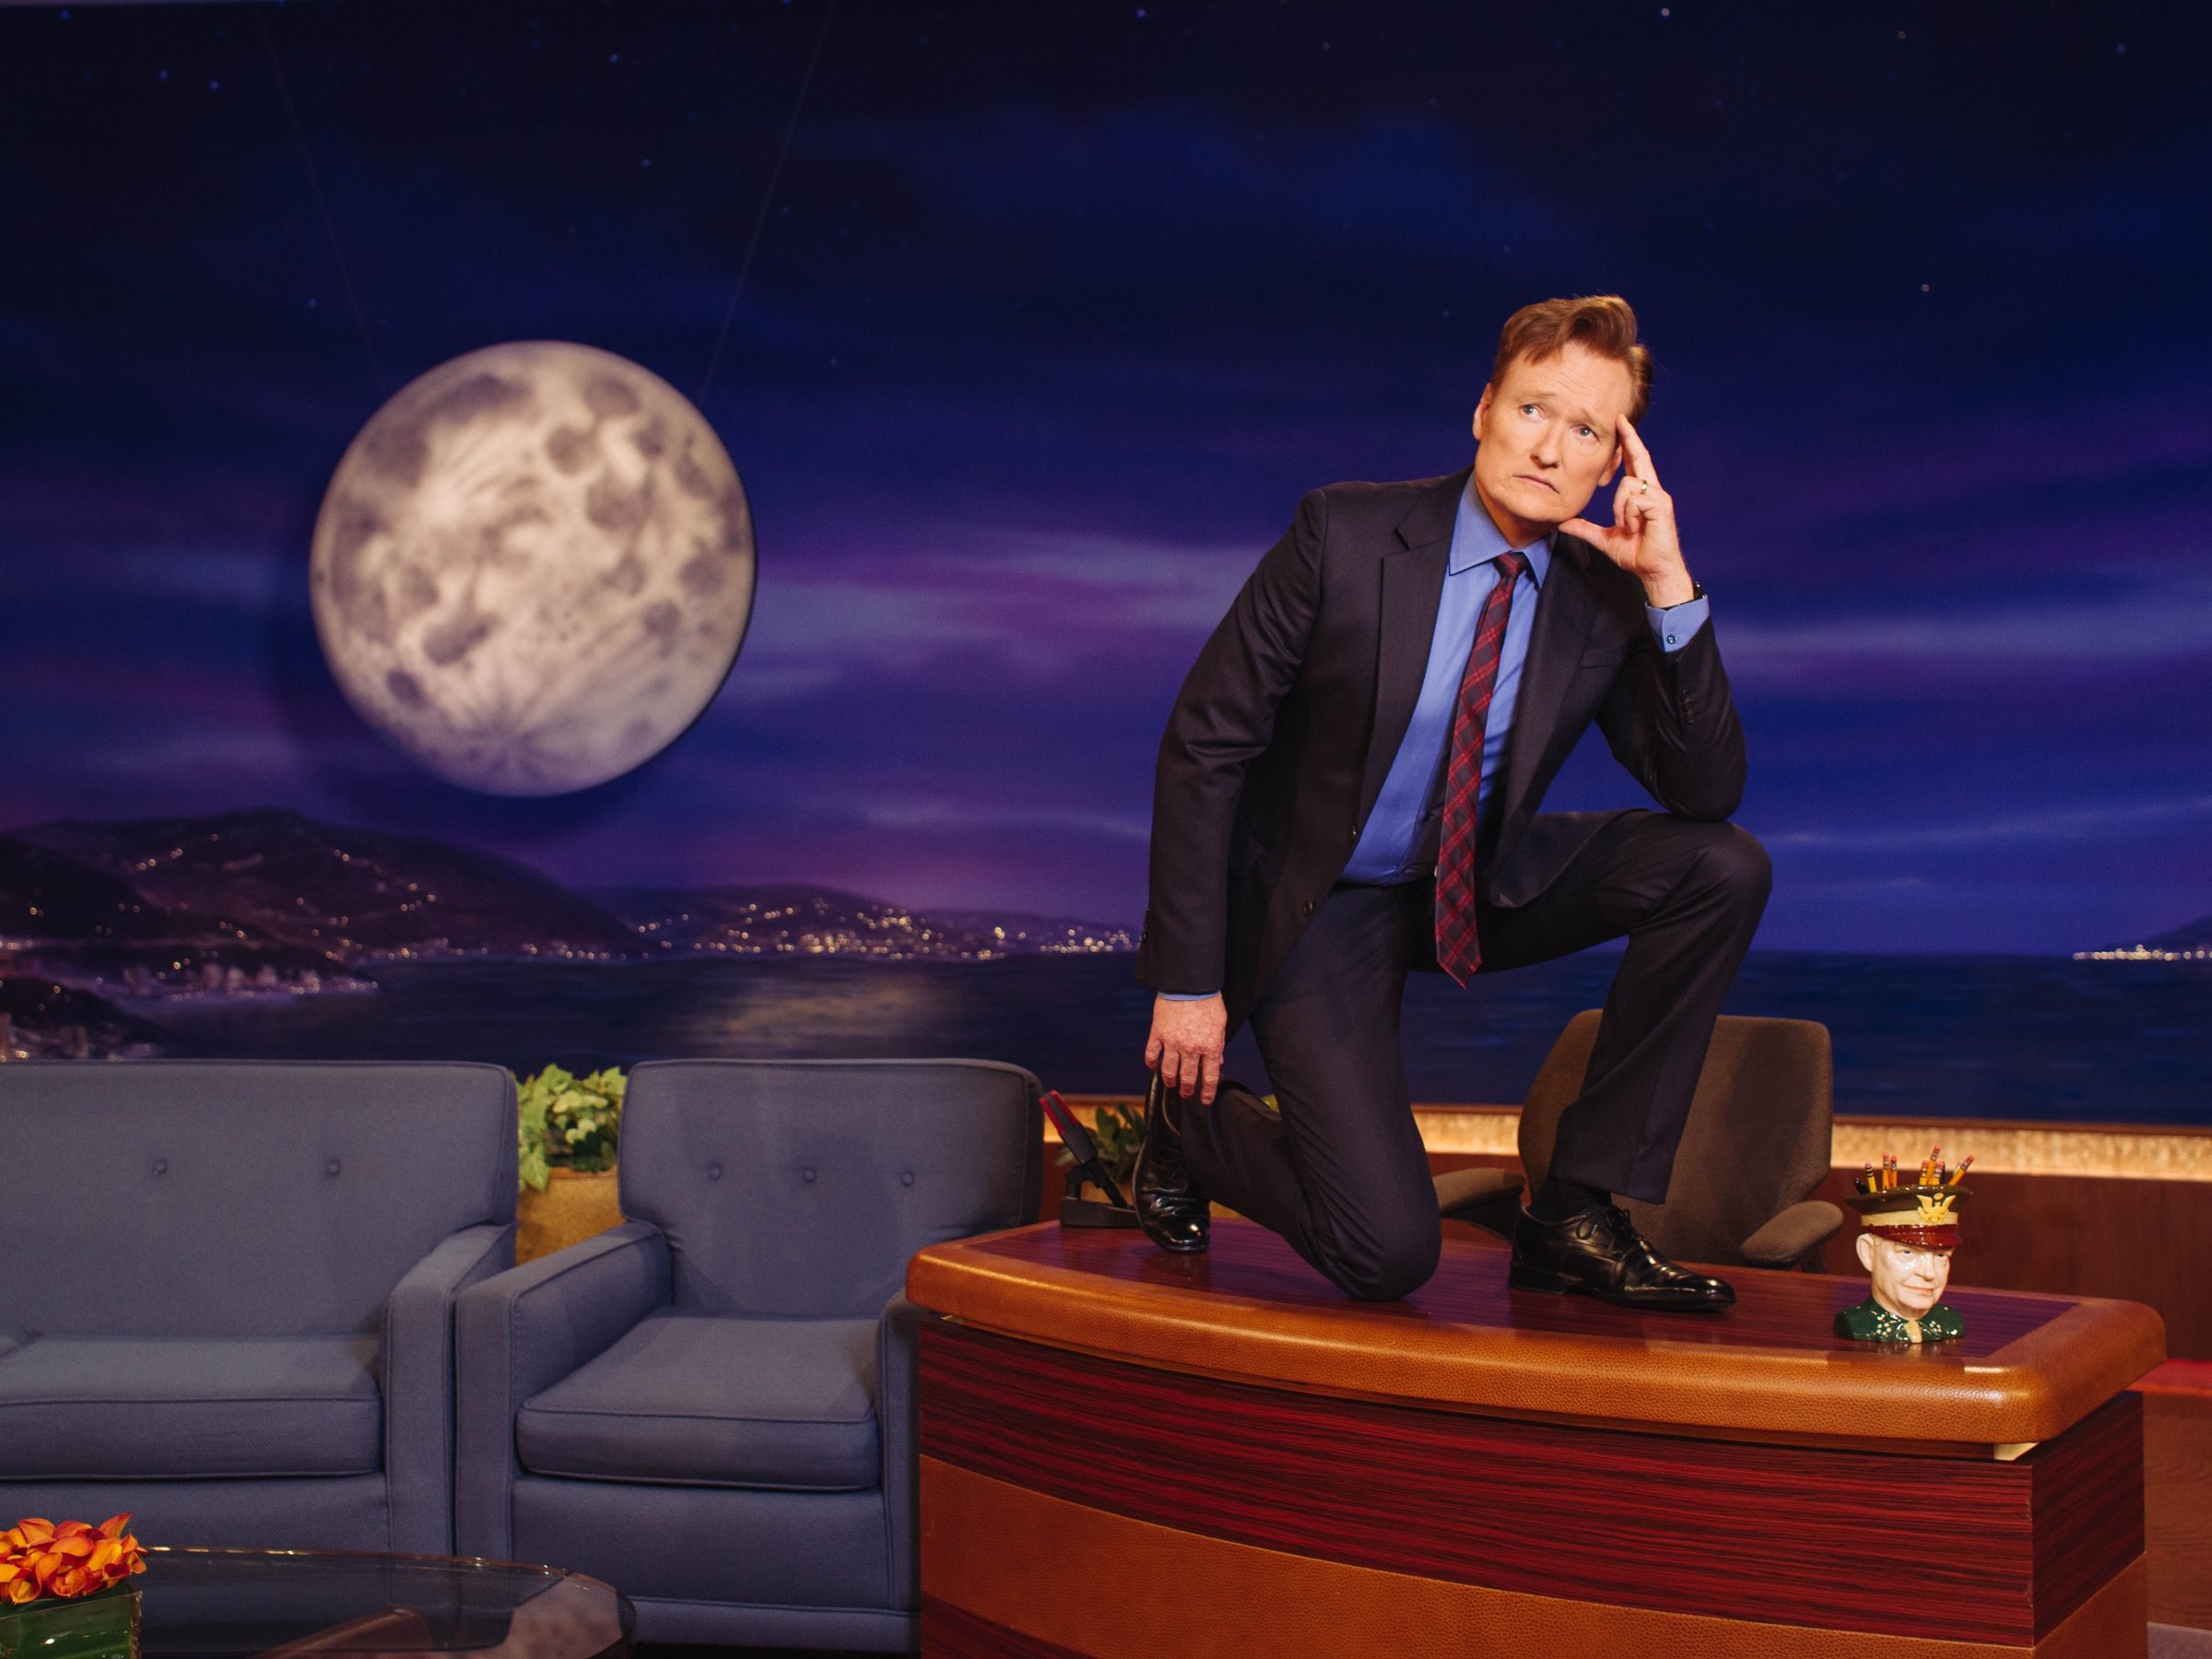 High-definition desktop wallpaper featuring a television show host posing humorously on the set with a moon backdrop and night skyline.